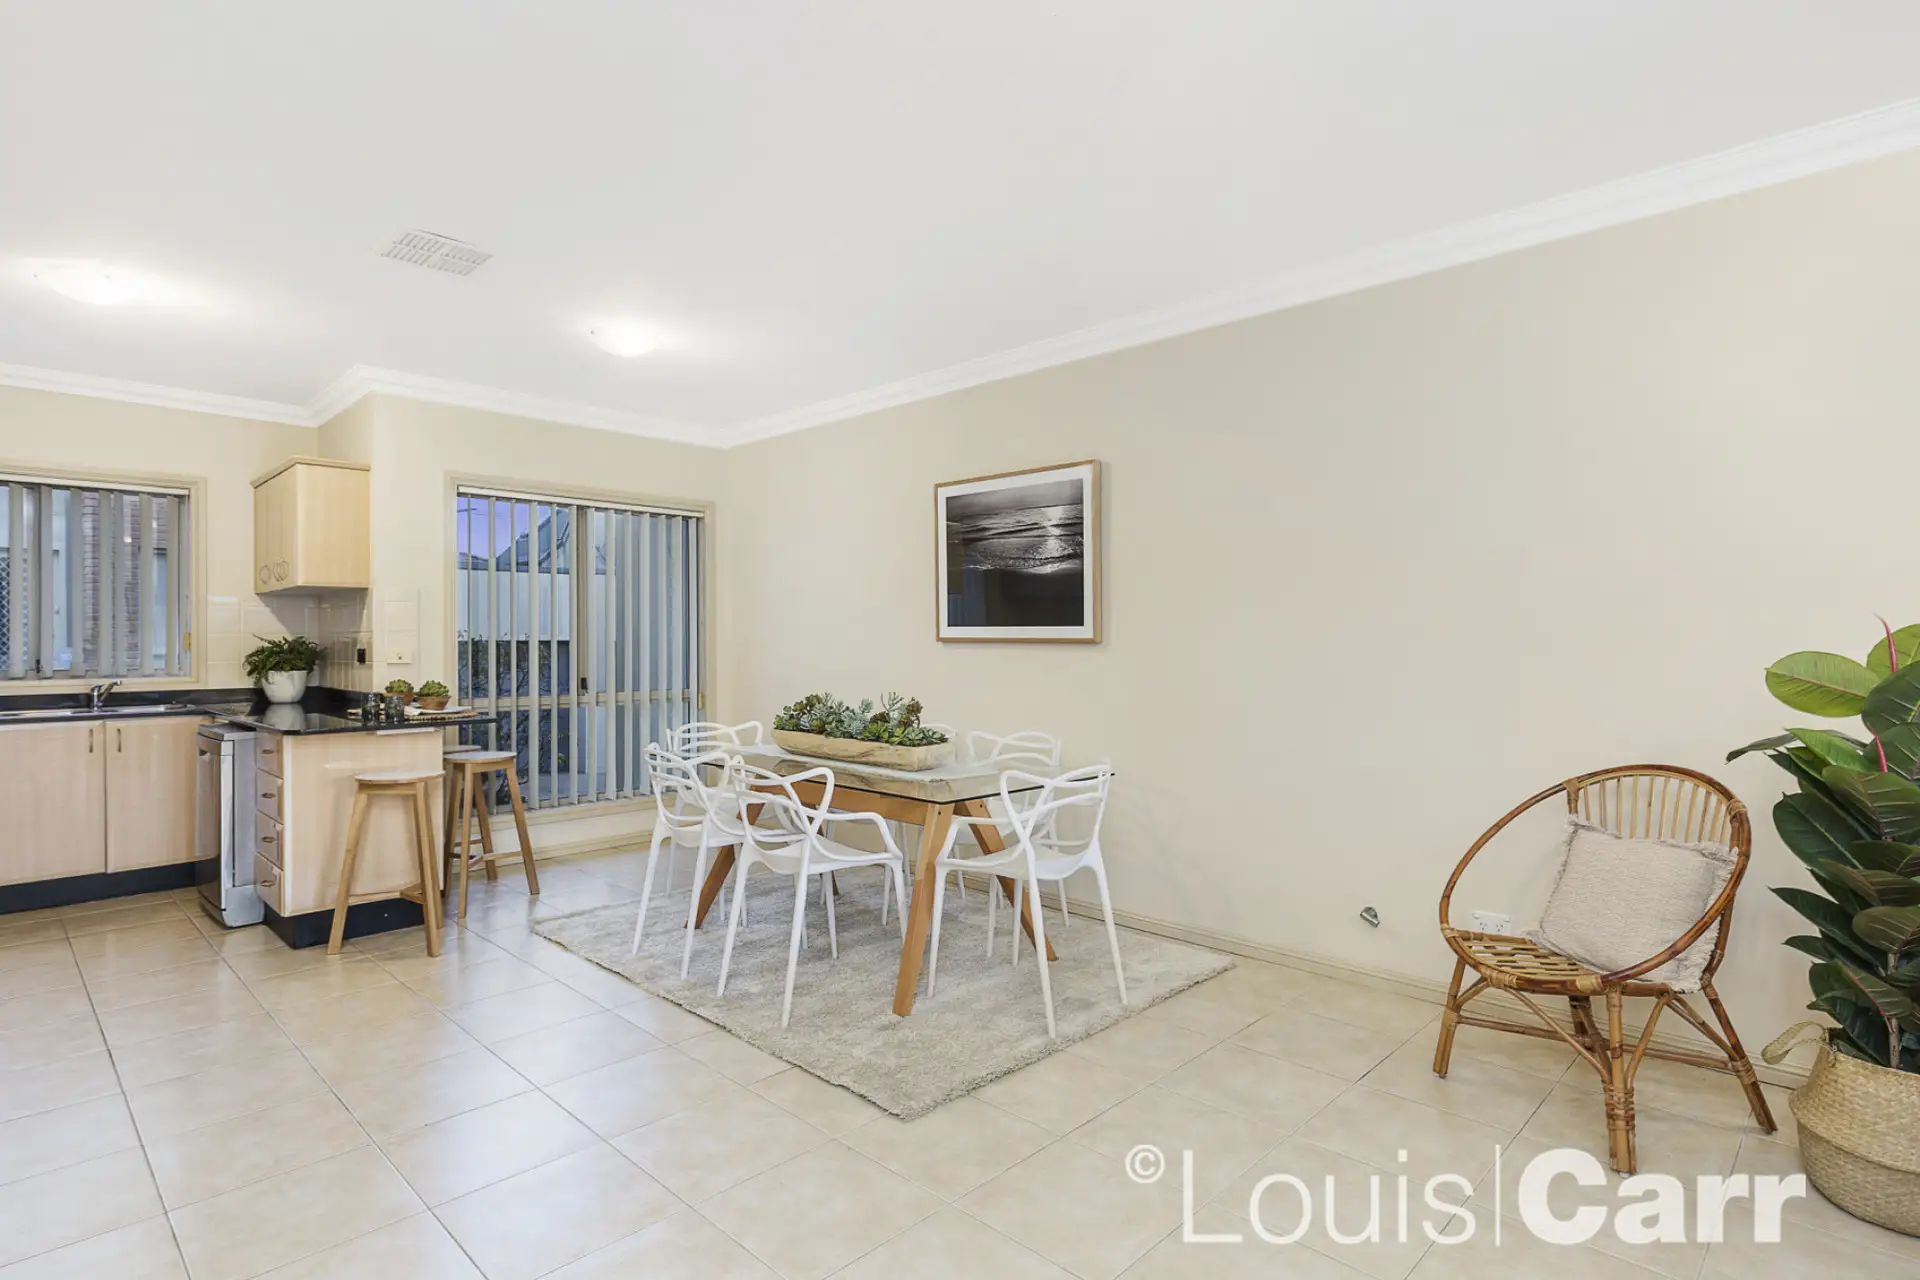 Photo #7: 14/83-93 Railway Street, Baulkham Hills - Sold by Louis Carr Real Estate